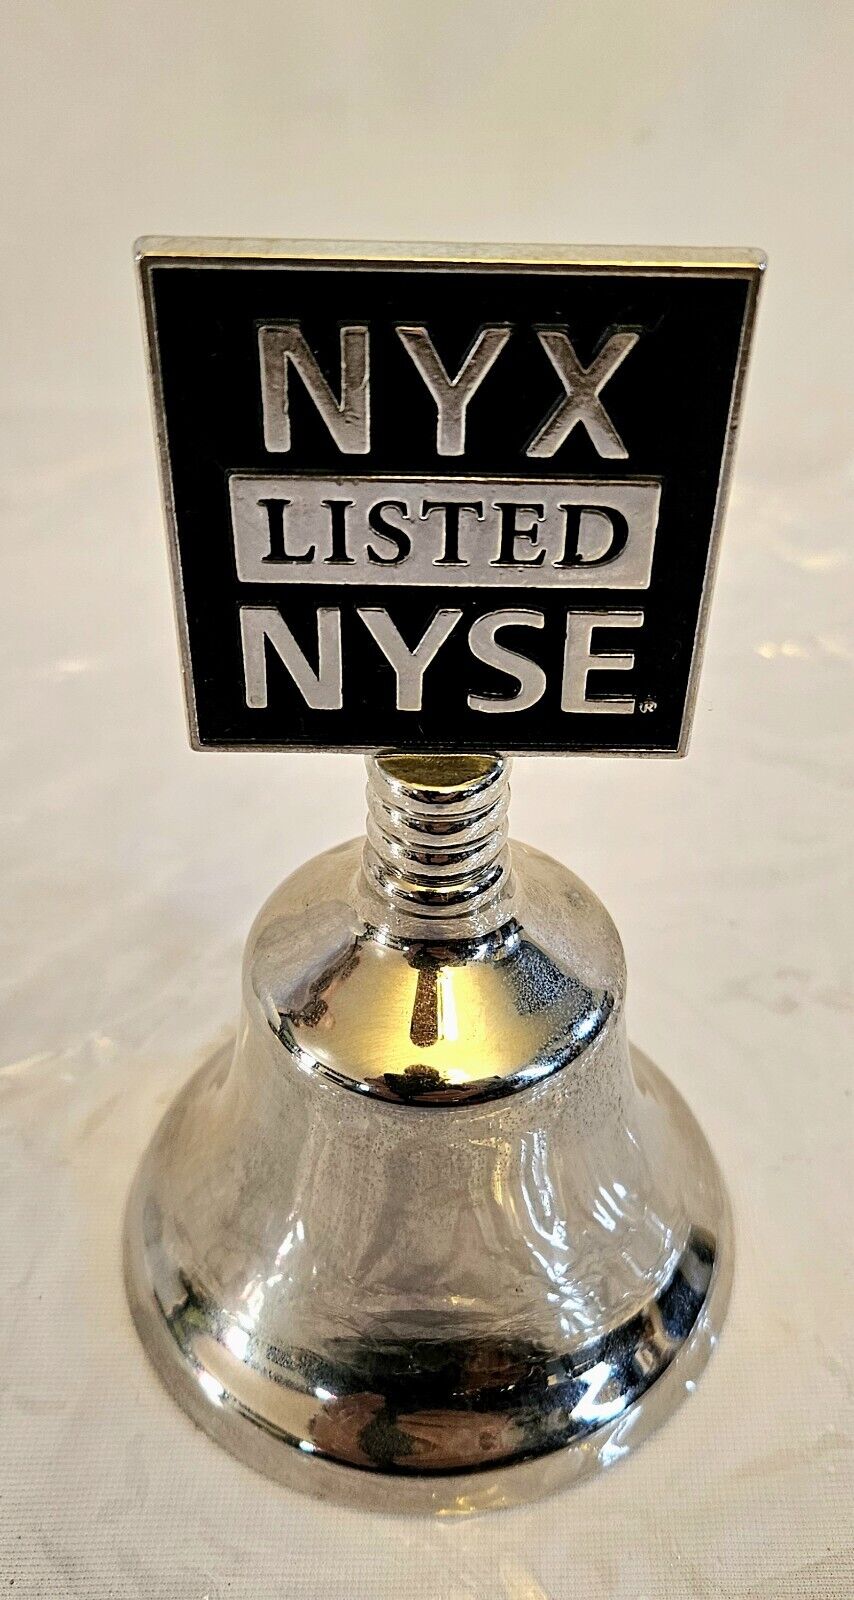 Limited Edition NYX Listed NYSE Memorabilia Bell 2006